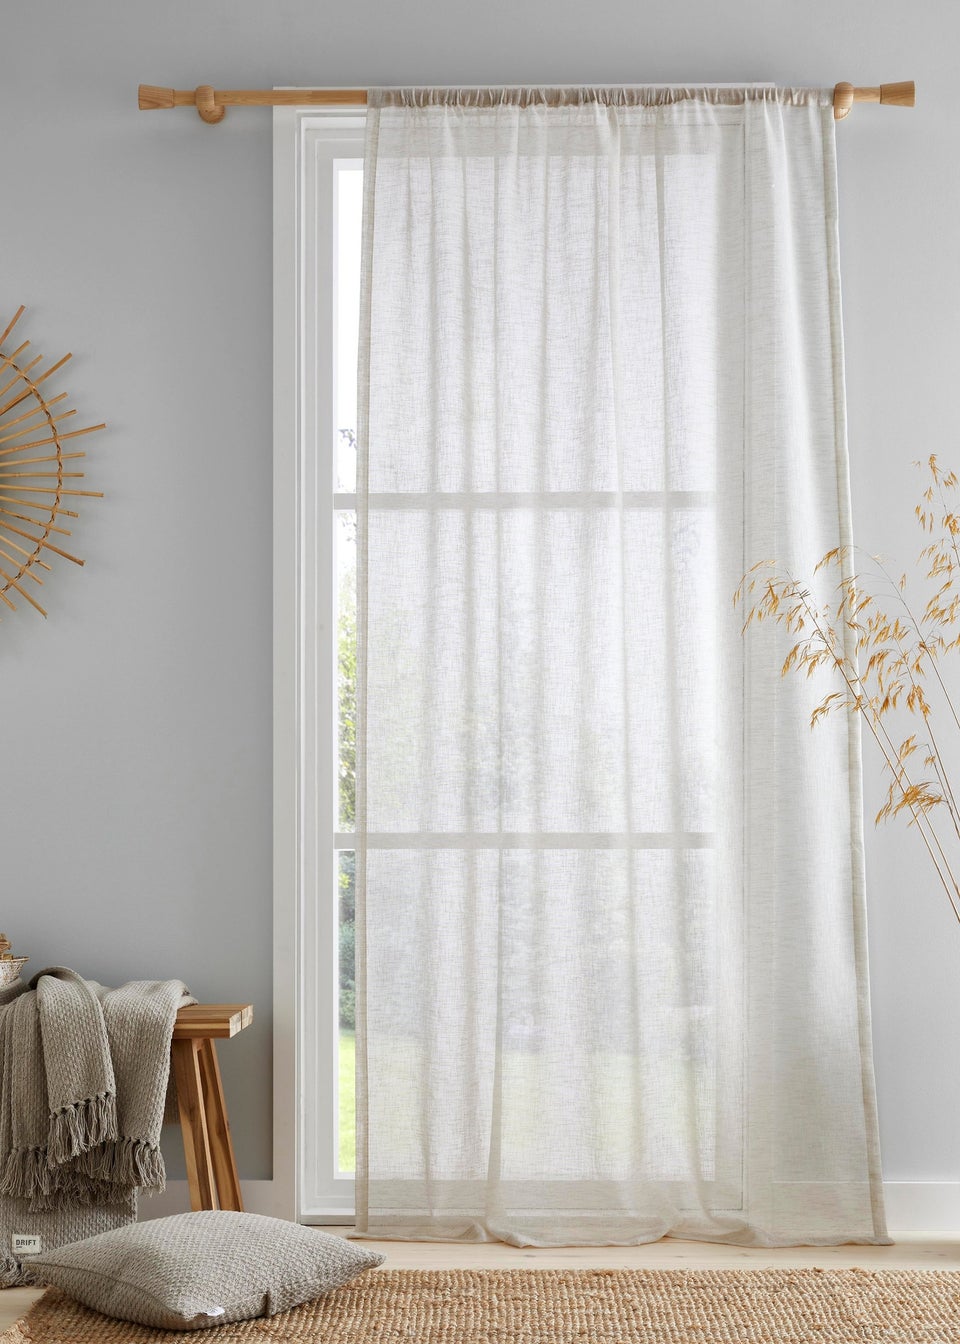 Drift Home Kayla Natural Voile Panel